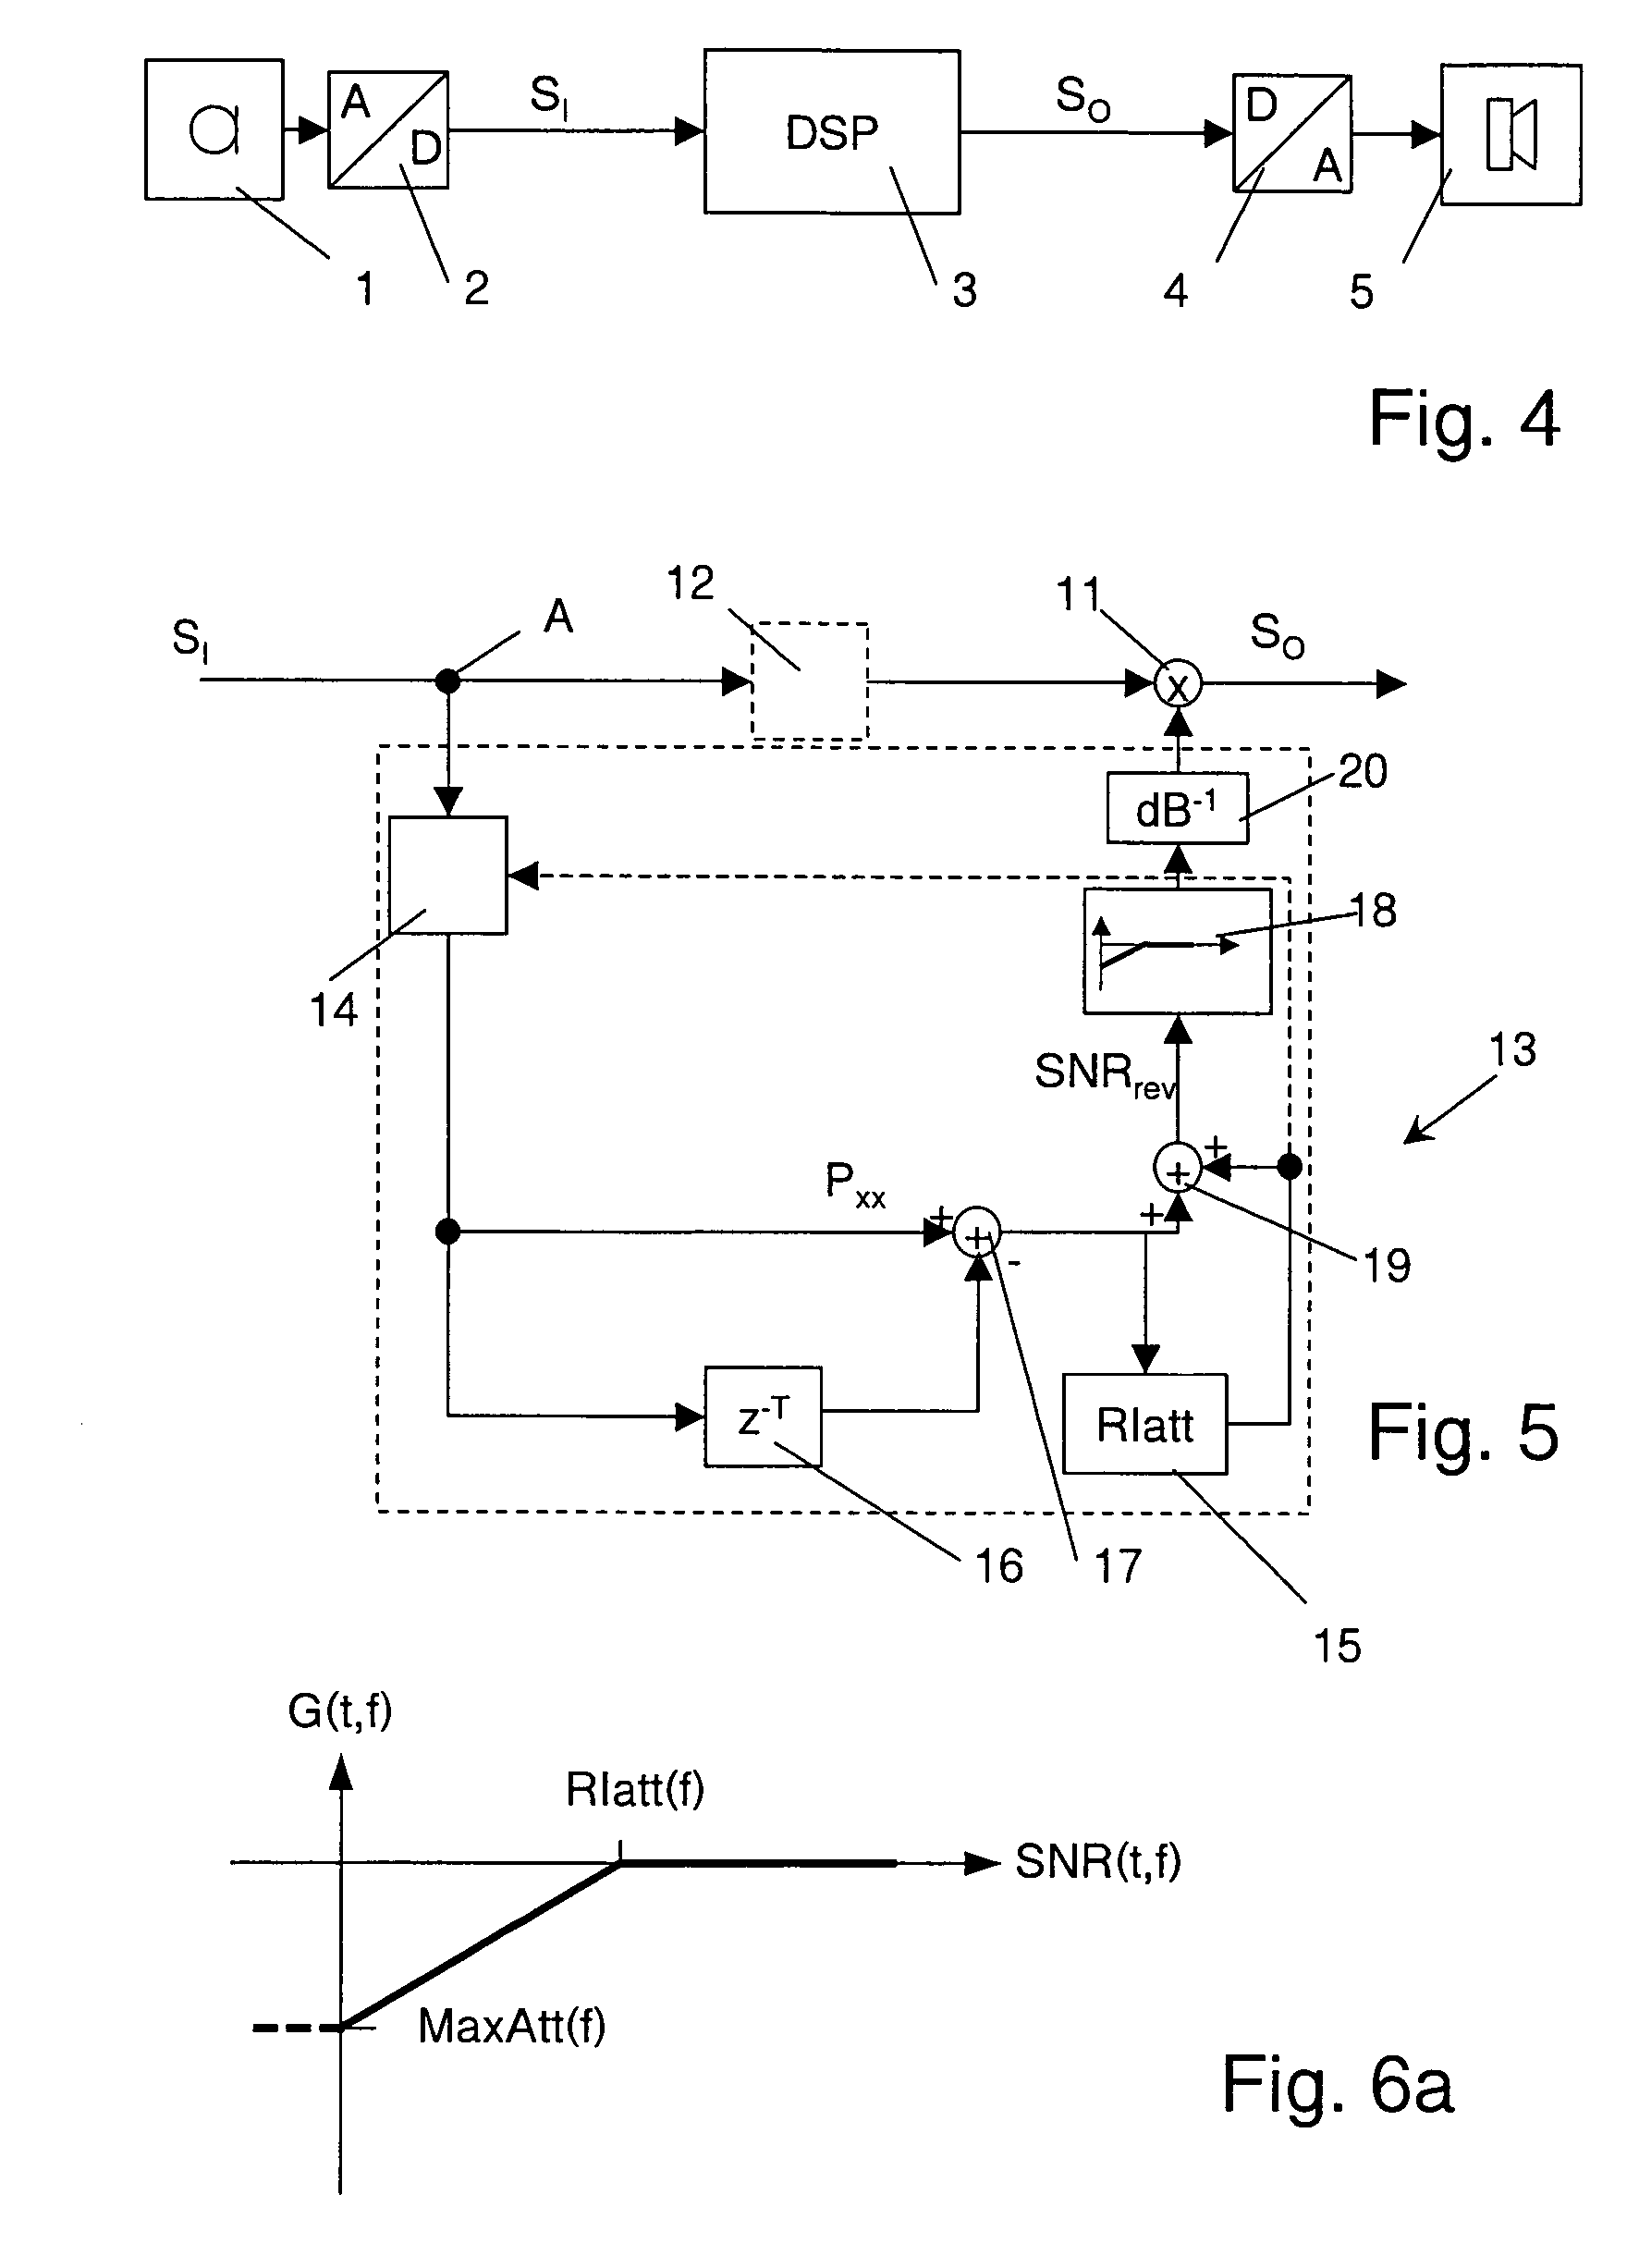 Method of processing an acoustic signal, and a hearing instrument